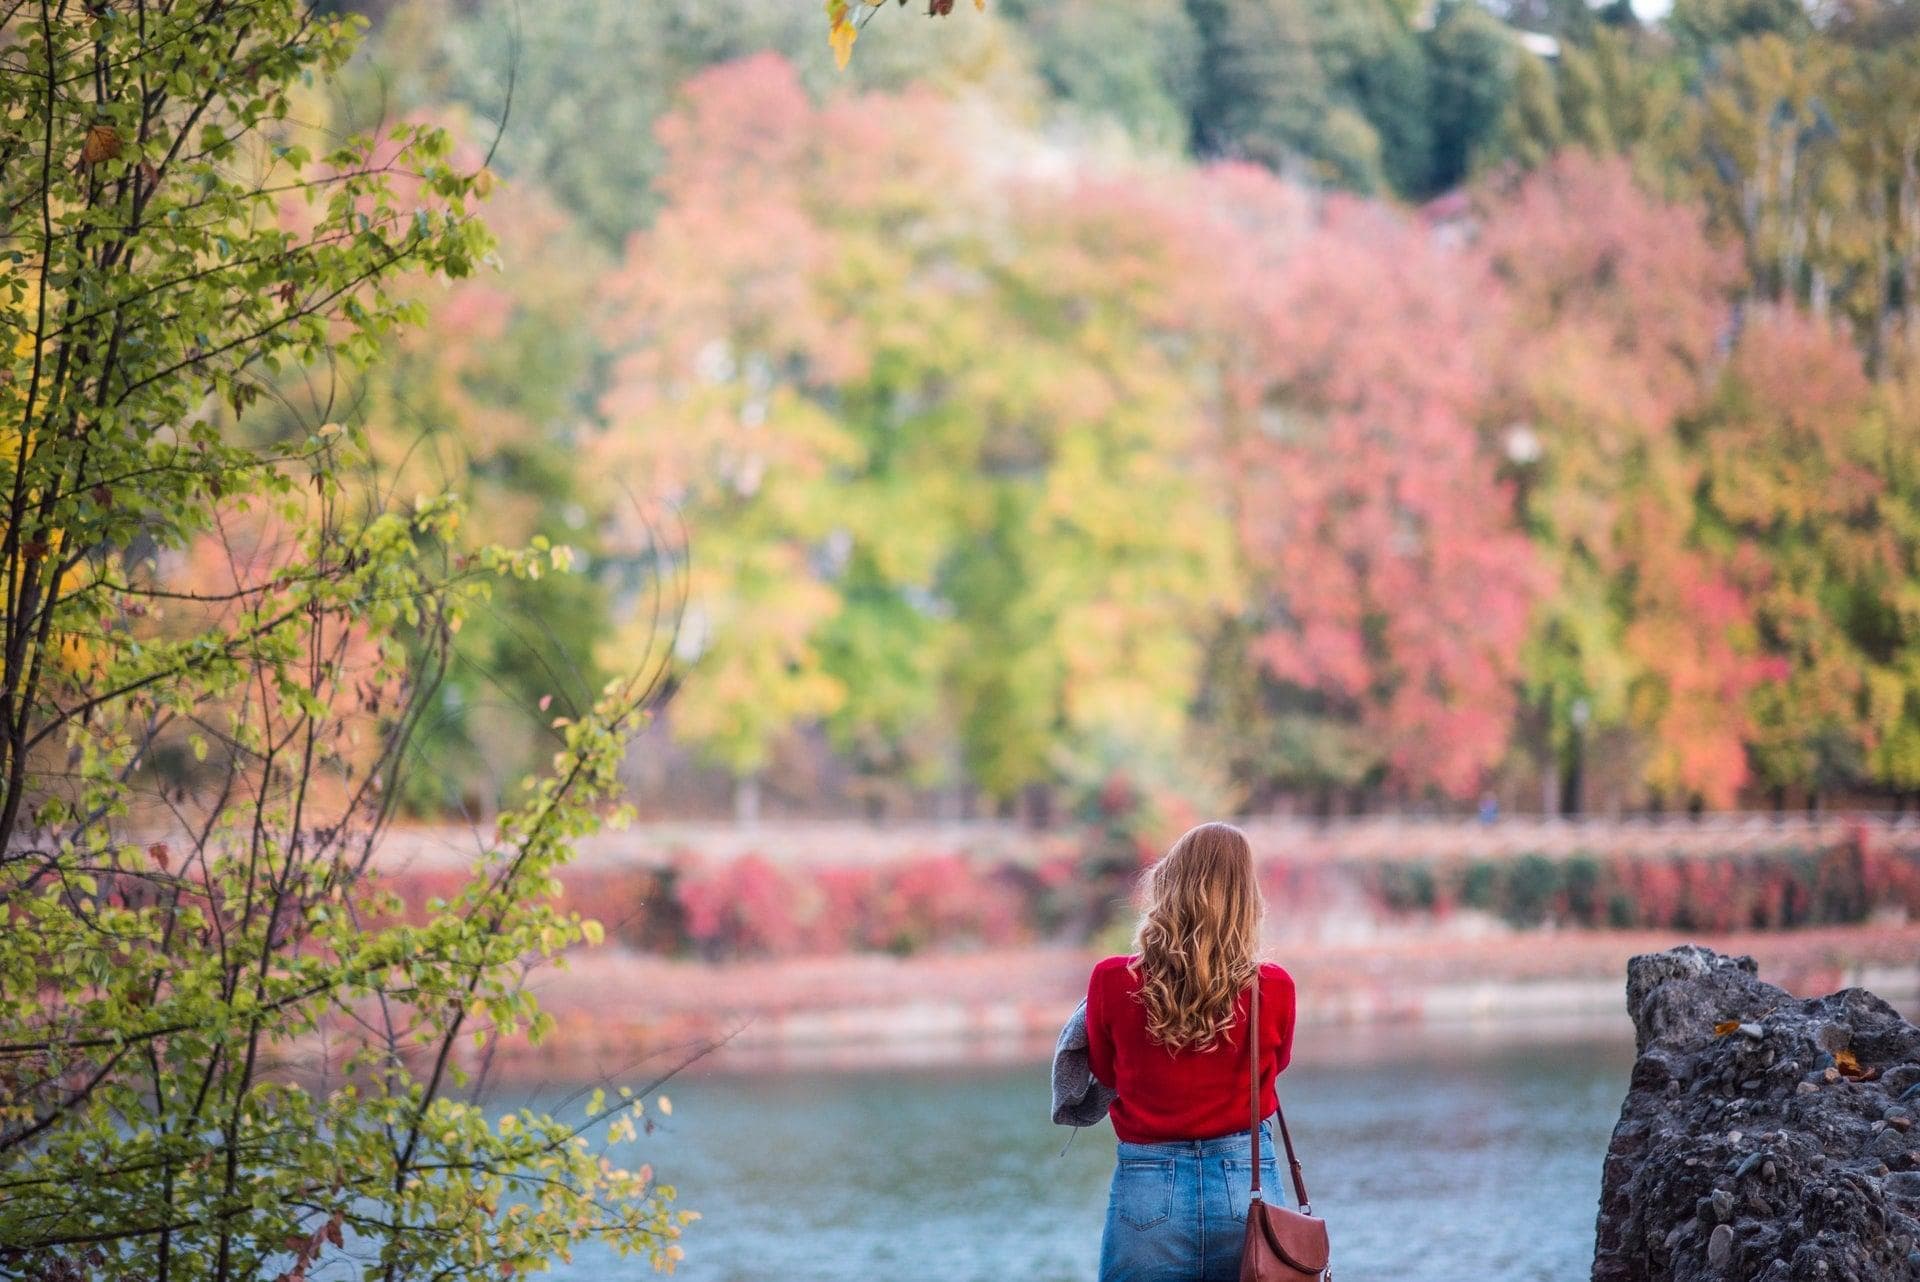 A women dressed in red looking at blossoming trees over a lake.